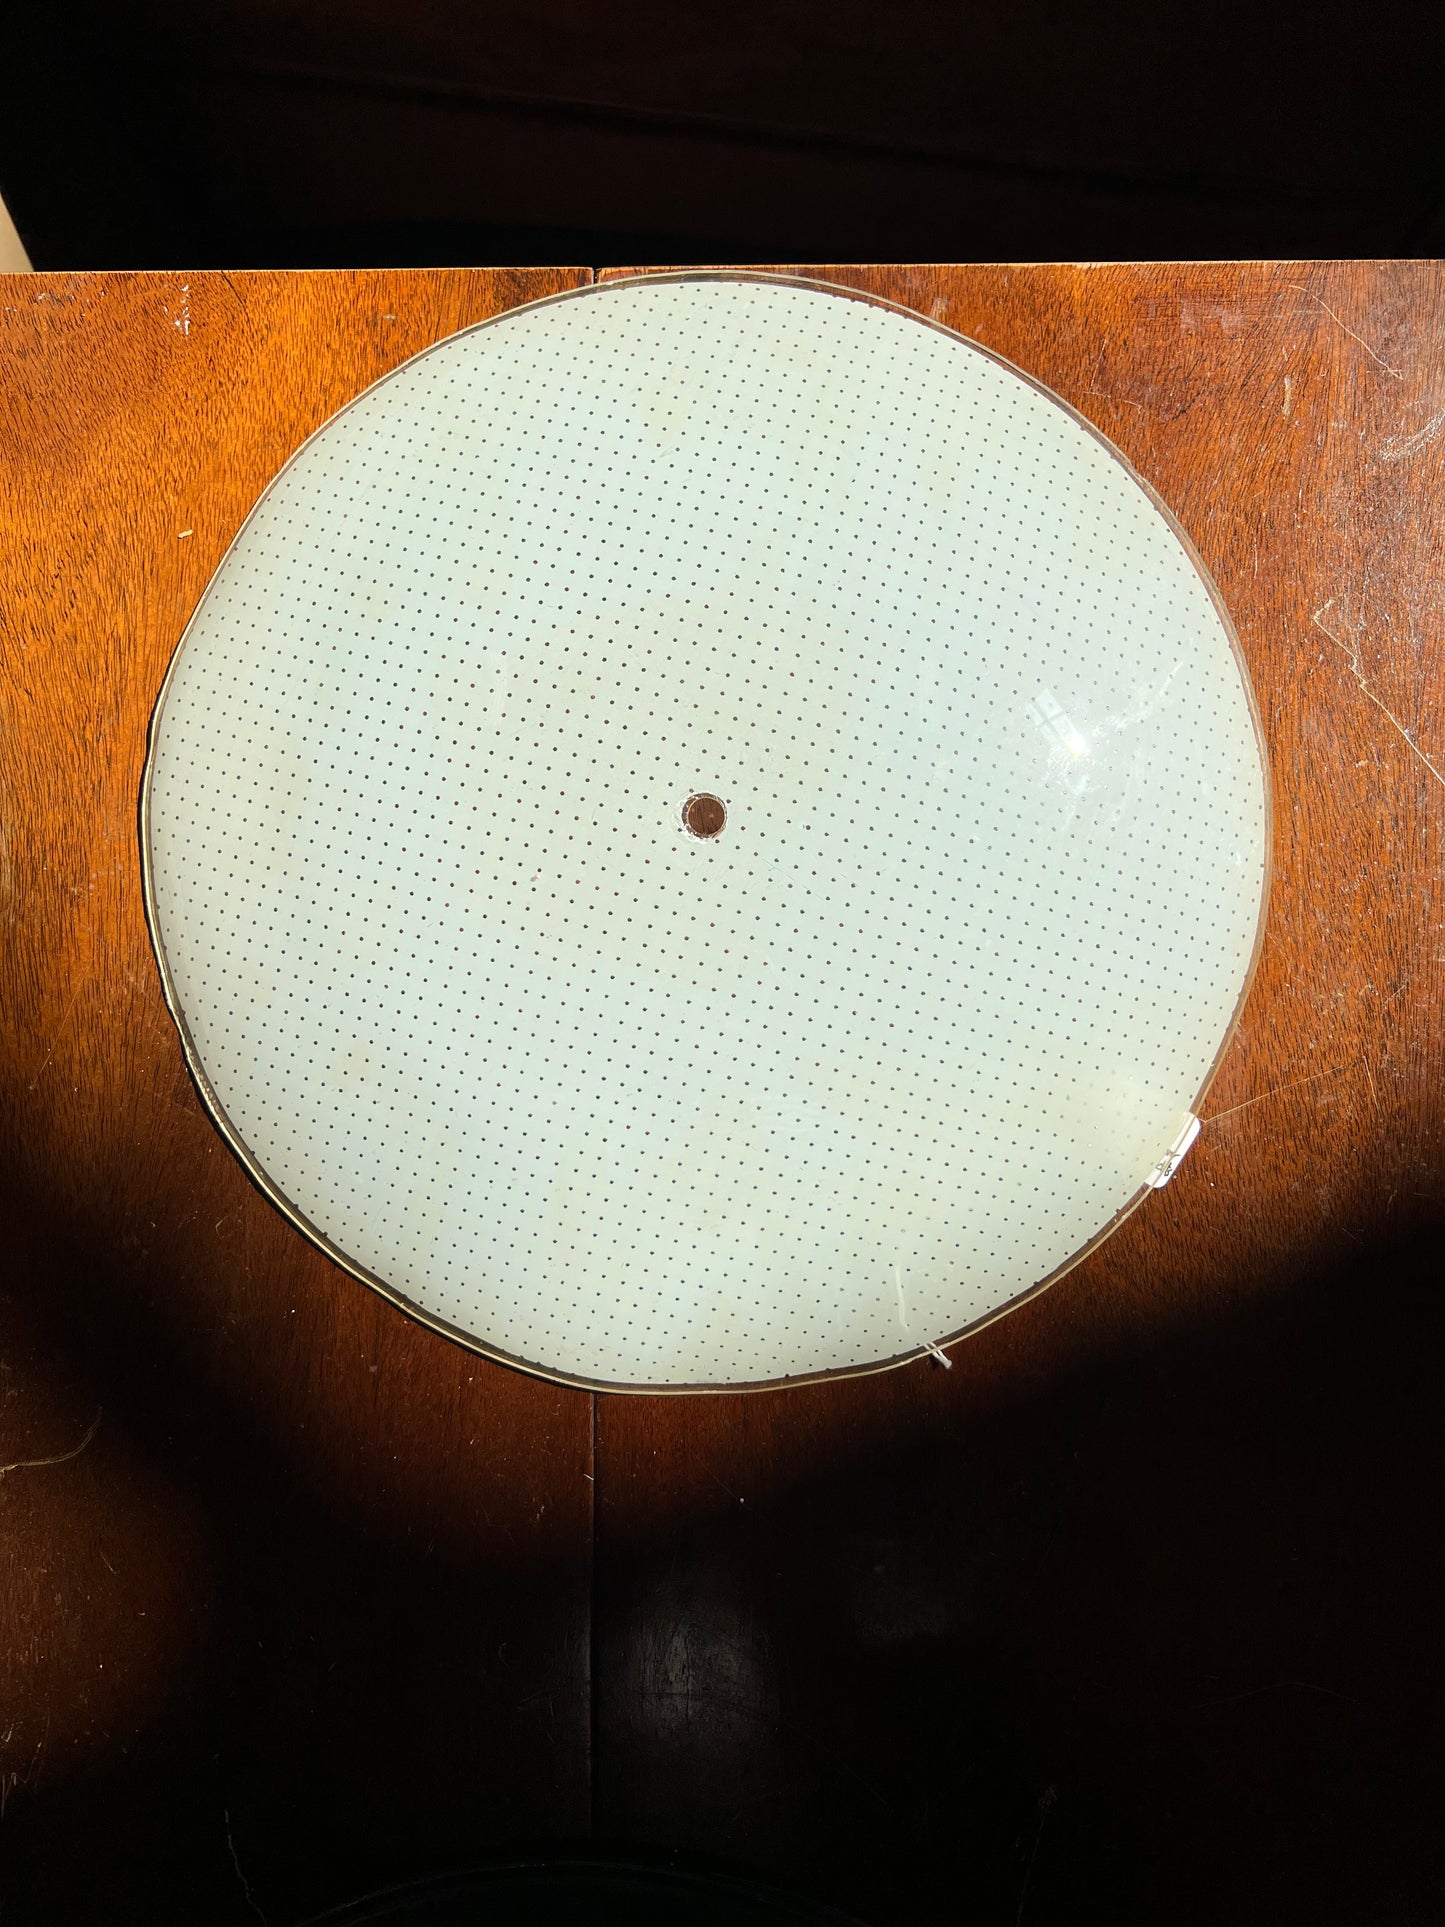 Mid Century Flush Mount Ceiling Light Cover Round with Polka Dots